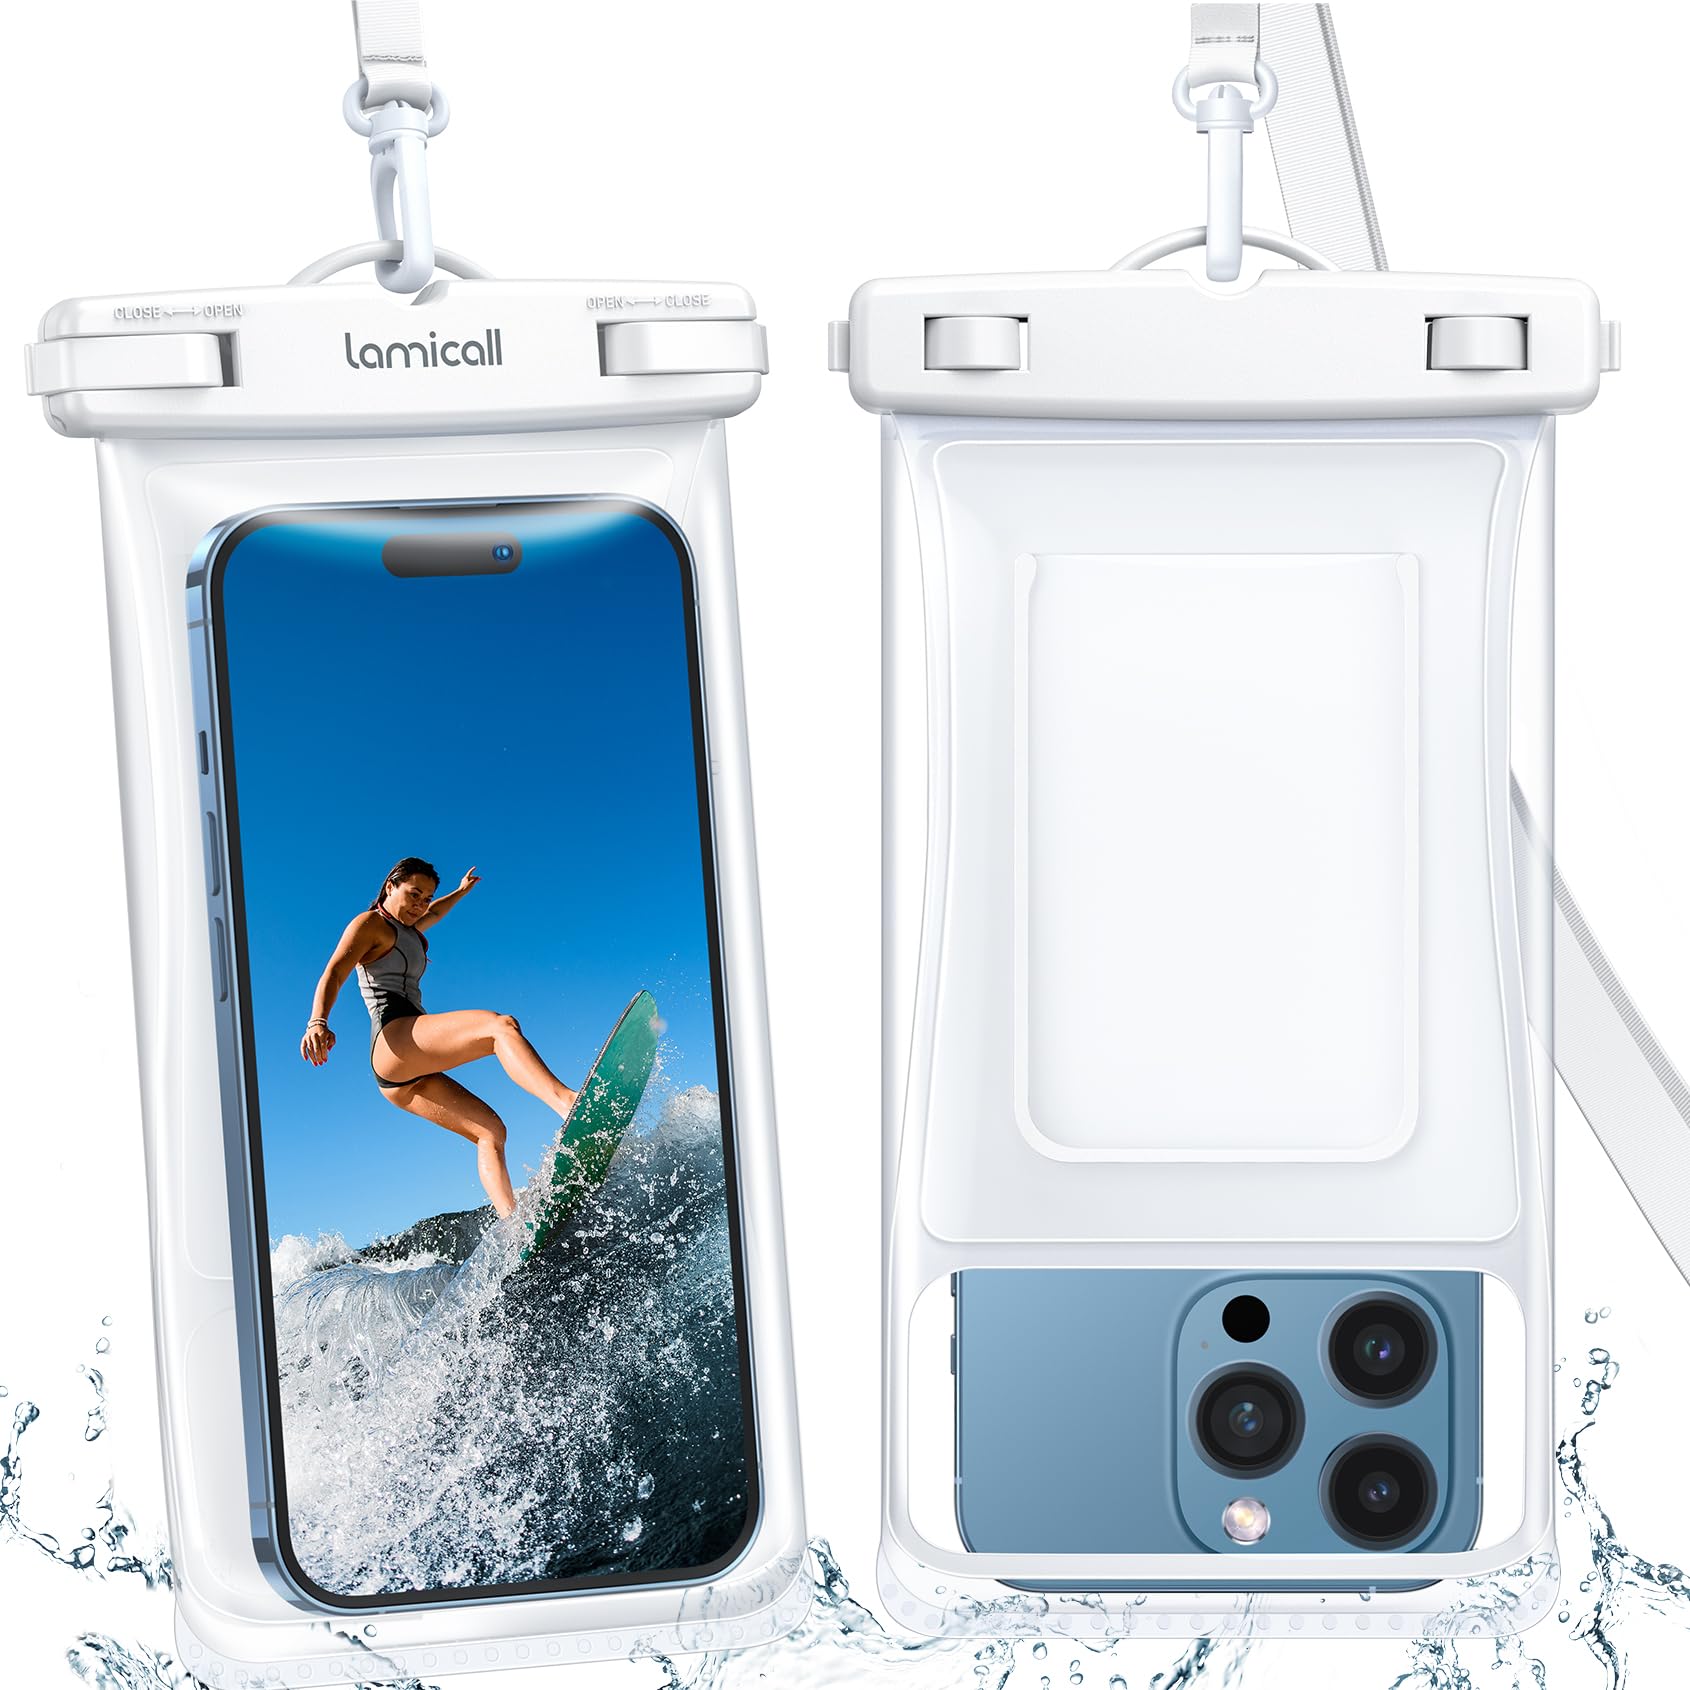 Lamicall Waterproof Phone Pouch Floating - Soft 3D Seamless Design] IPX8 Water Proof cell Phone case for Beach, Snorkeling Dry B